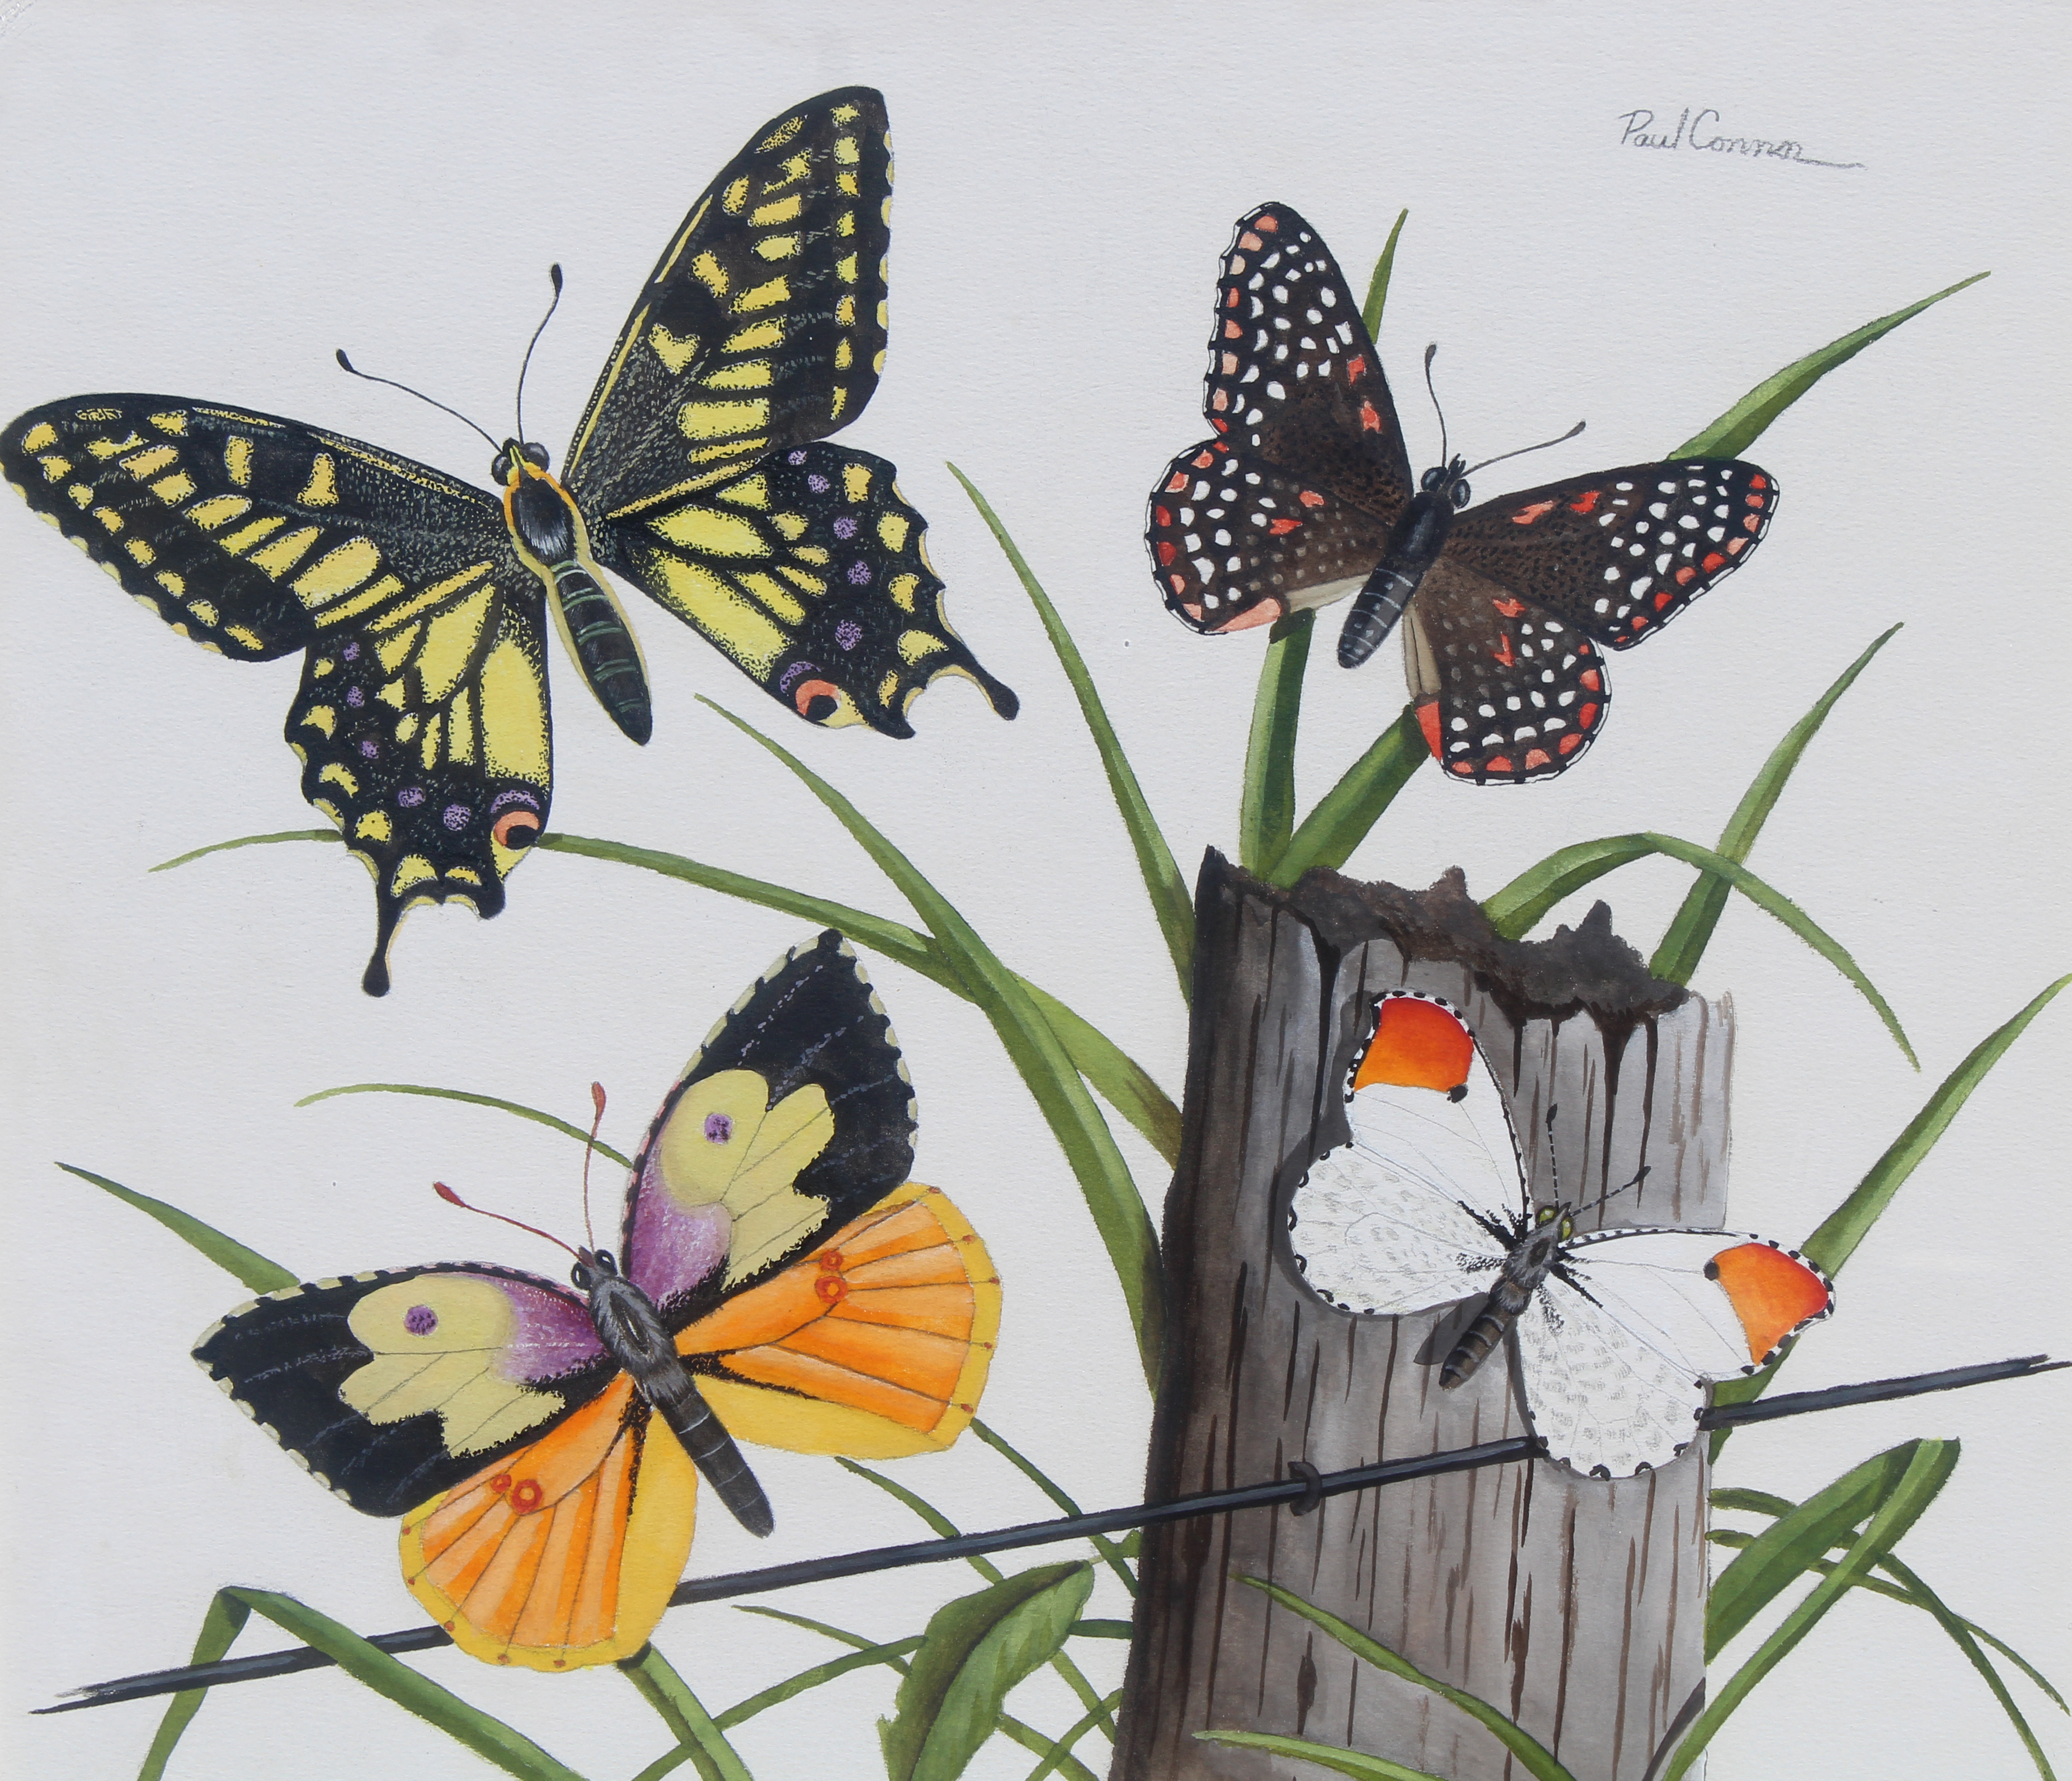 Paul Connor (20th C) "Butterflies" - Image 3 of 6